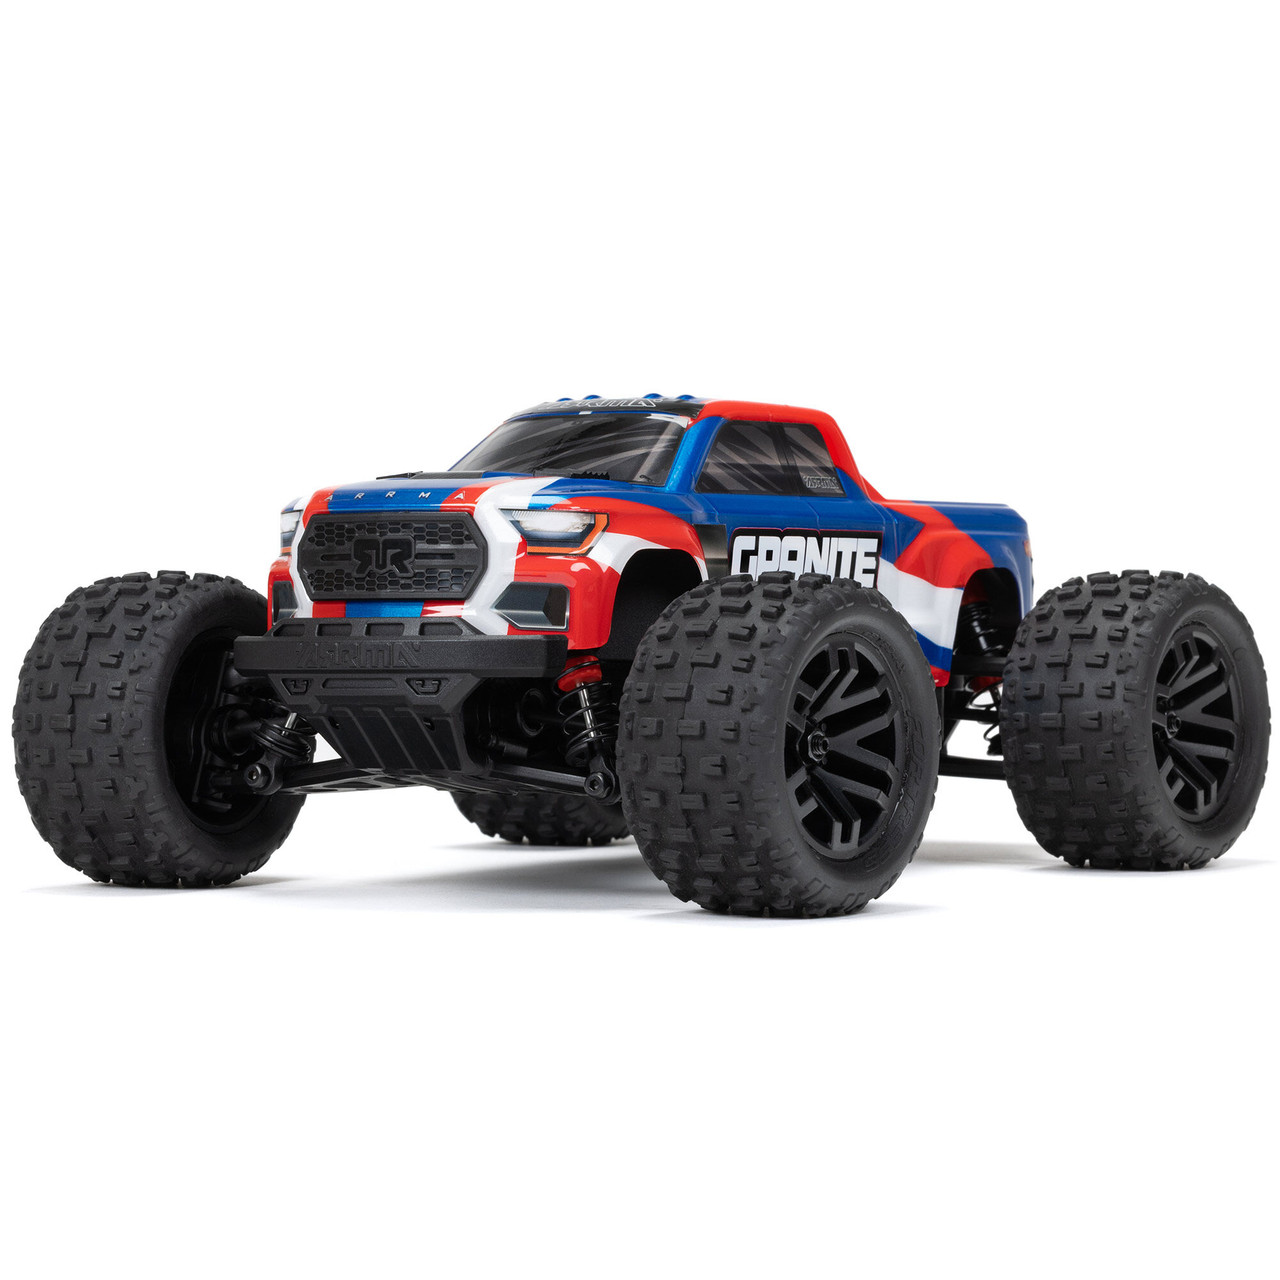 Seriously Cool Mini 4X4 Track Built for Tiny Off-Road RC Cars